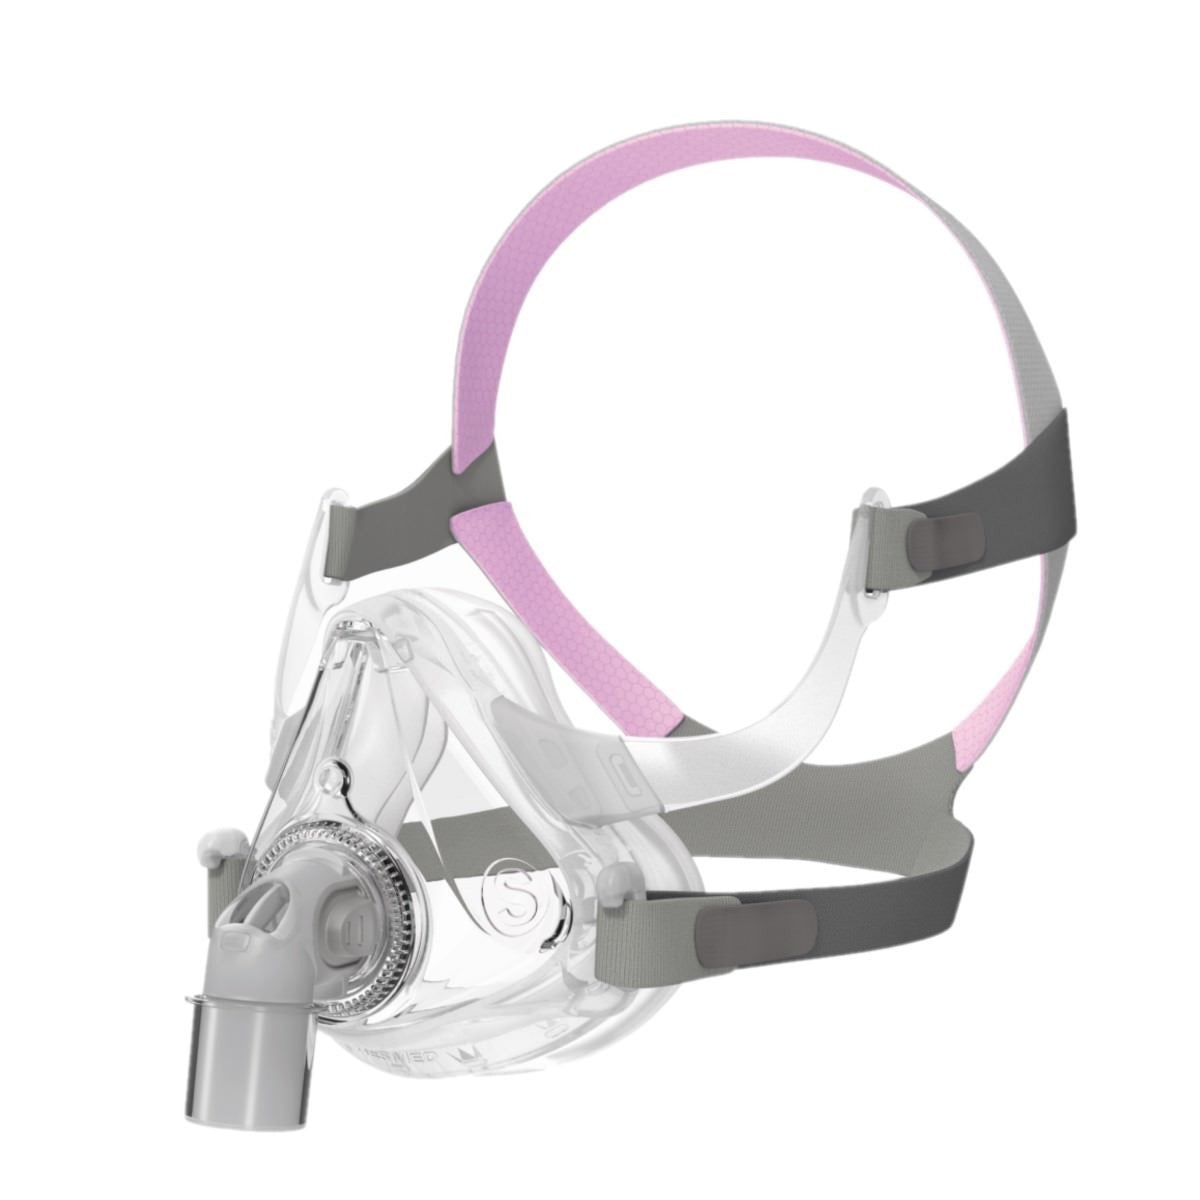 Resmed Airfit F10 For Her Full Face Mask System with Headgear